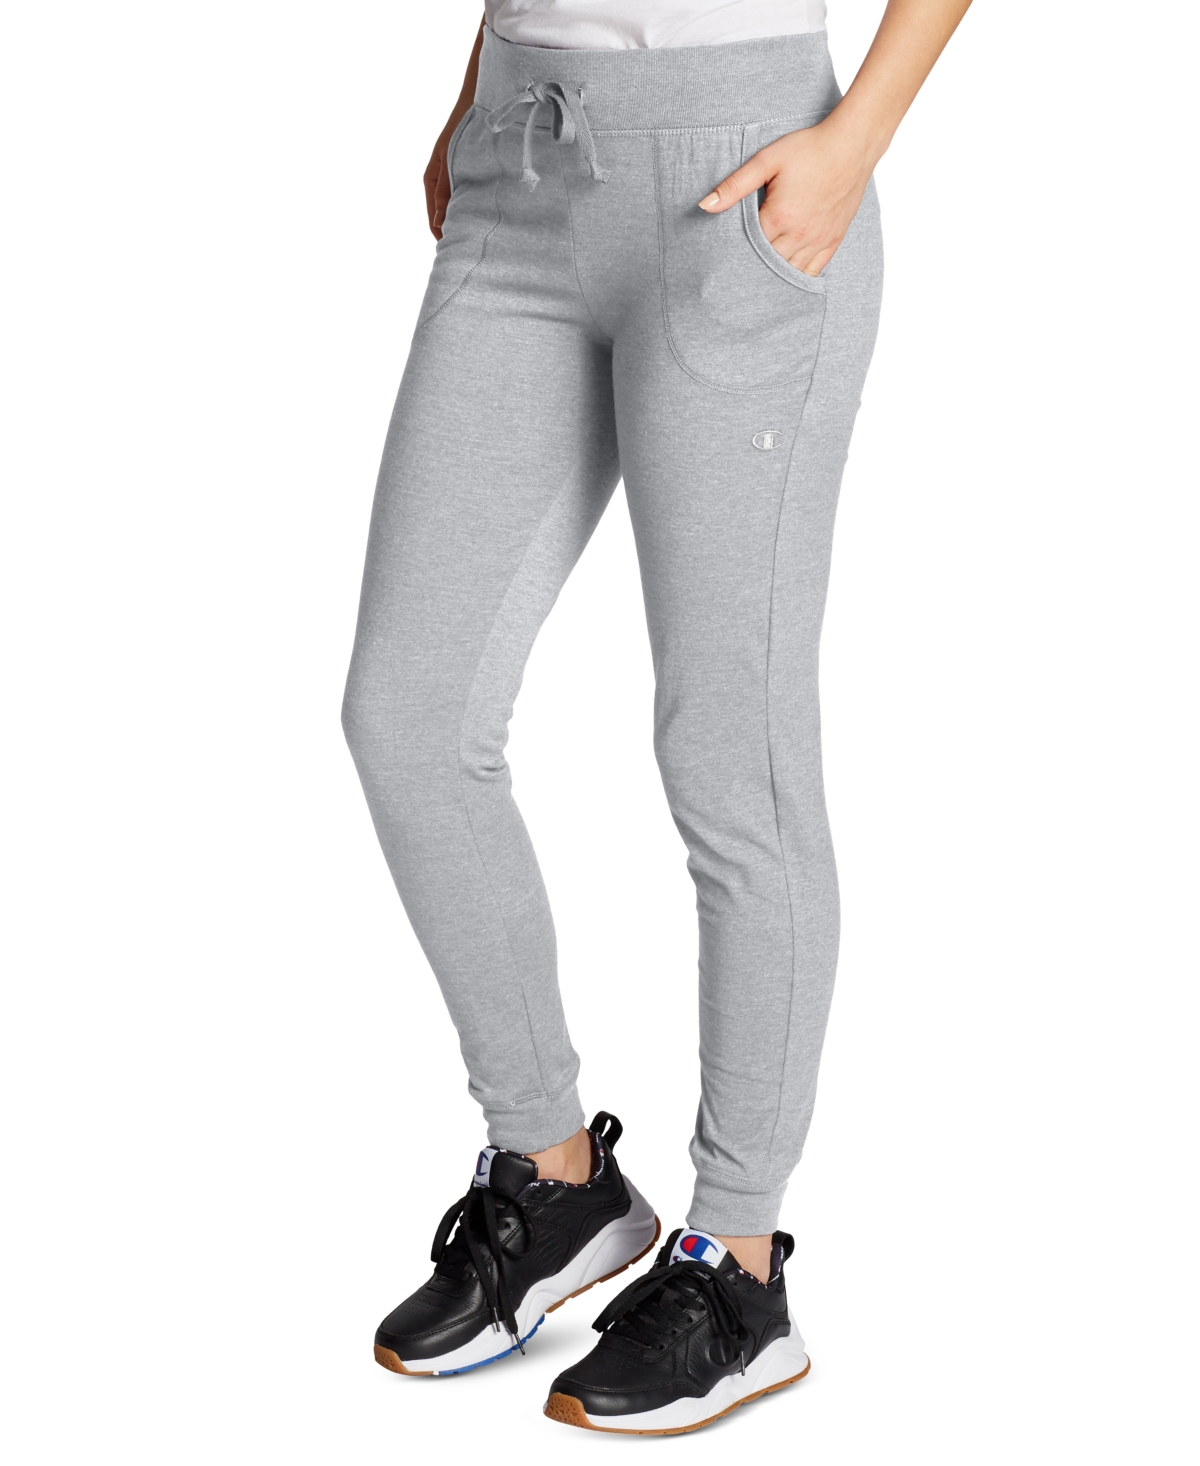 Women's Cotton Jersey Full Length Joggers - Oxford Gray